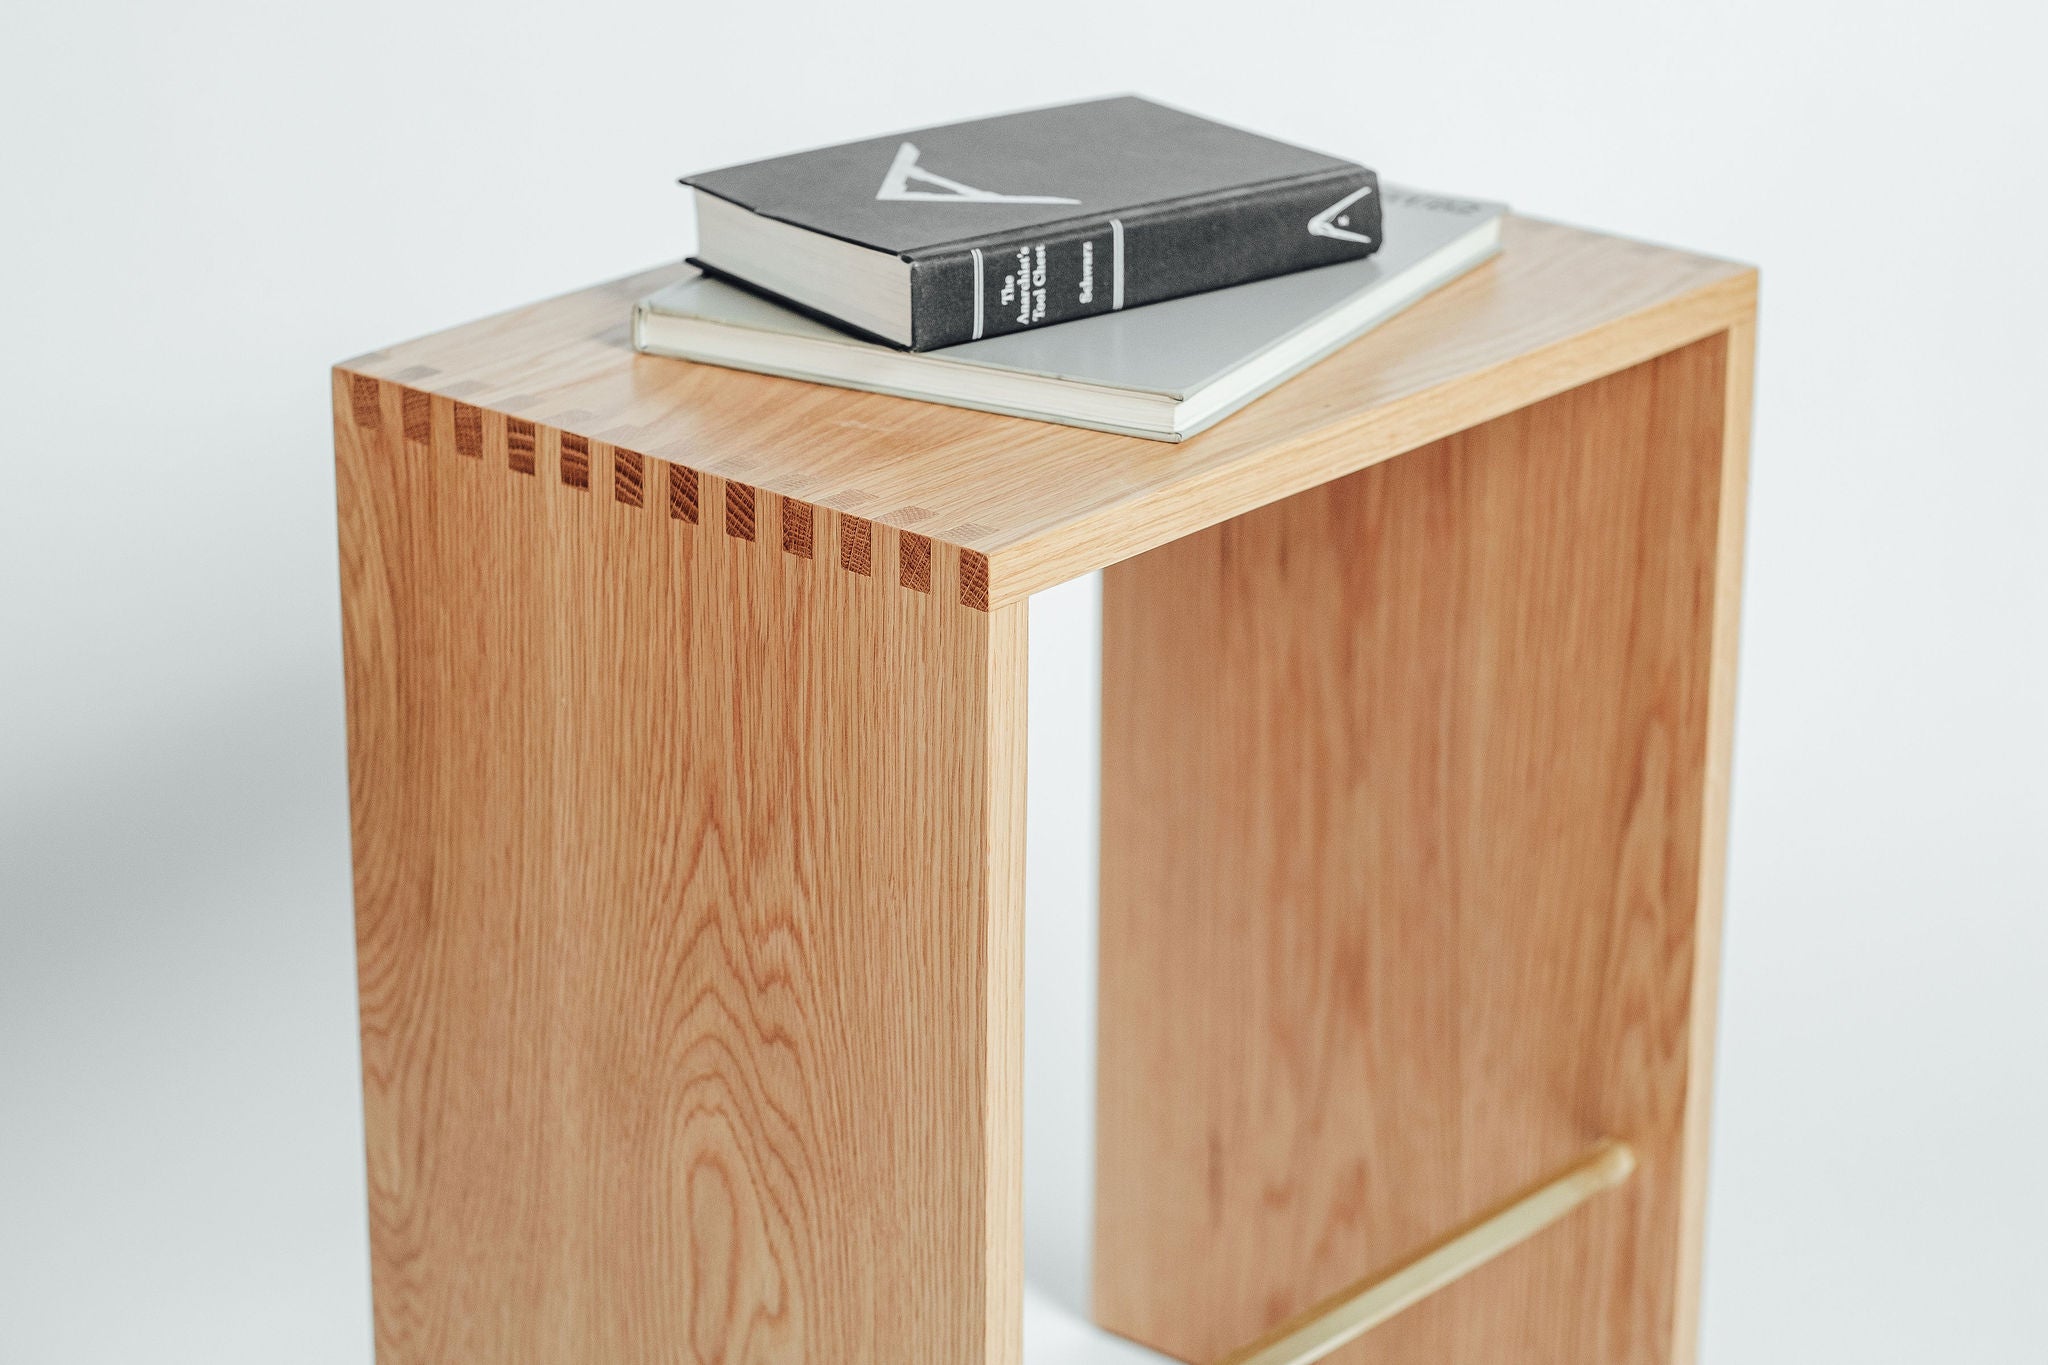 Heywood midcentury modern white oak wood side table handcrafted by Hunt & Noyer in Michigan